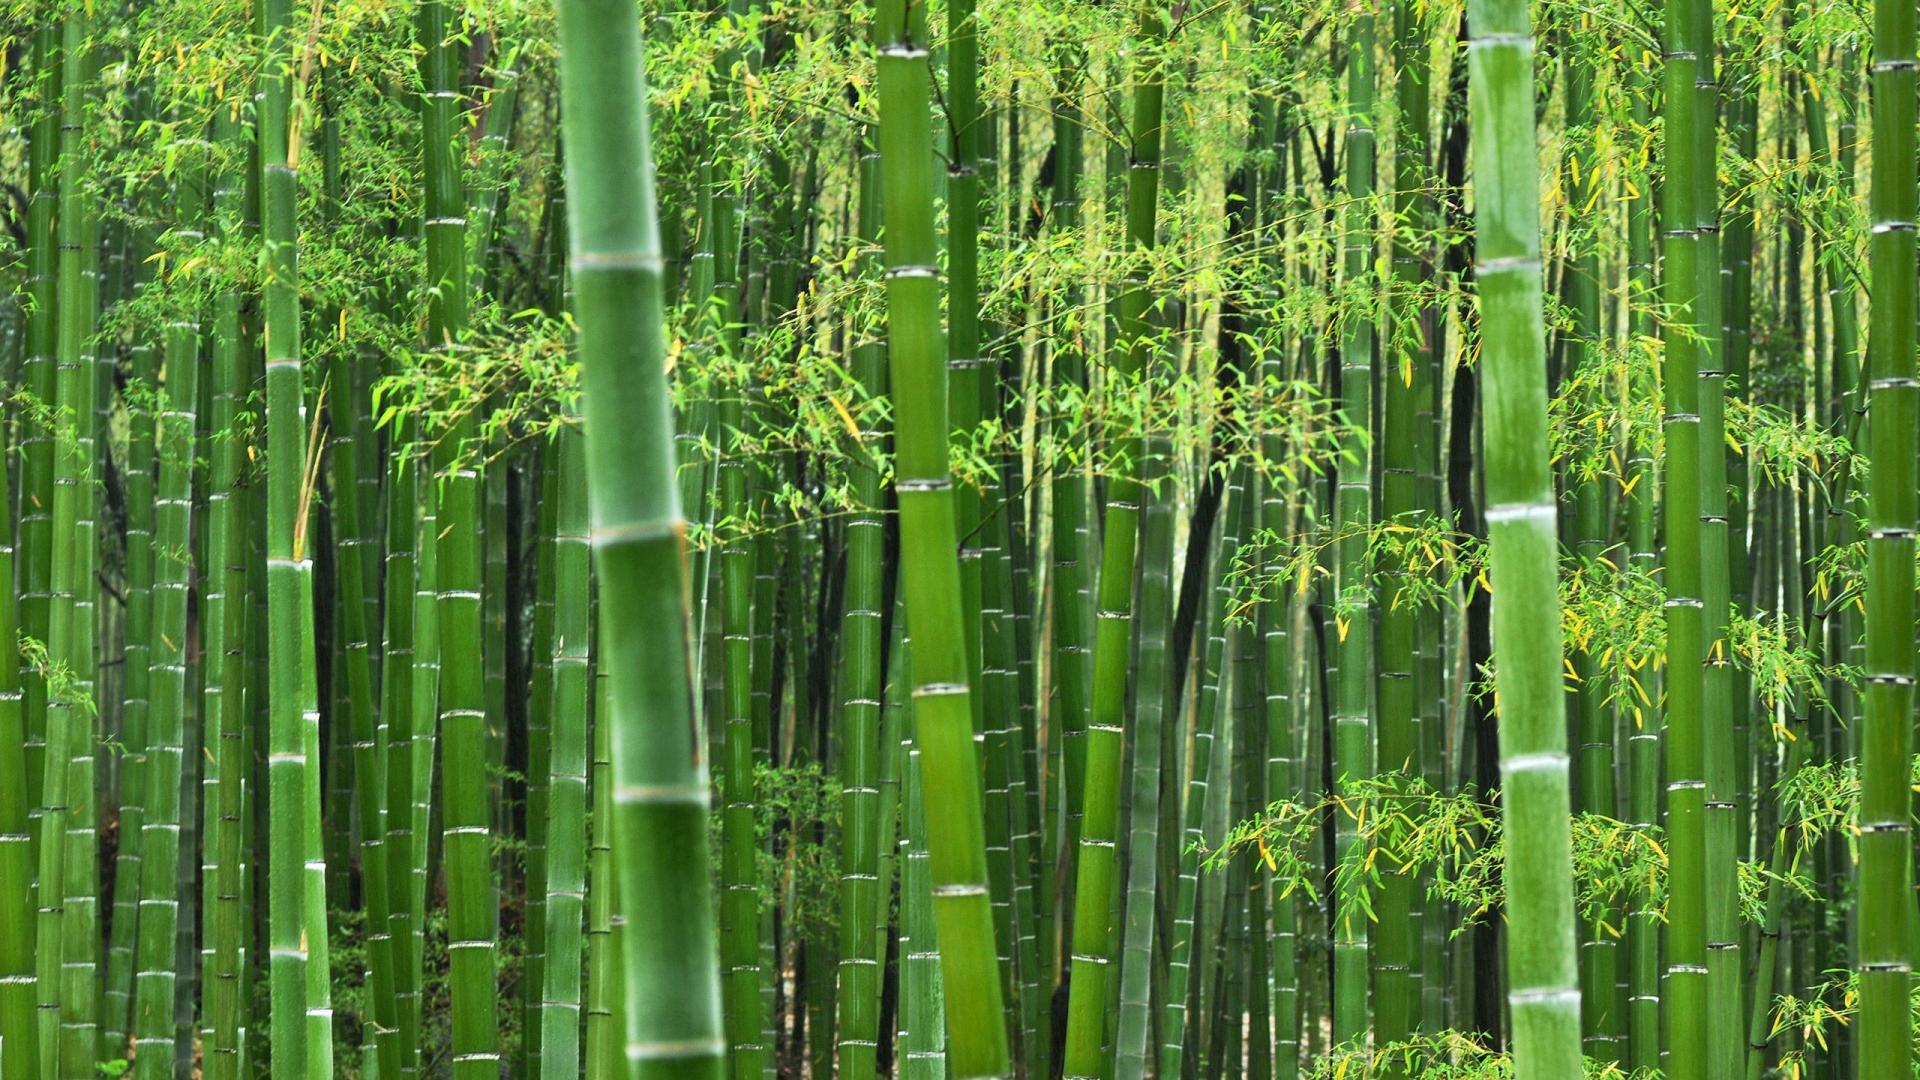  Bamboo wallpaper 1920x1080 Wallpapers HD Wallpapers Backgrounds